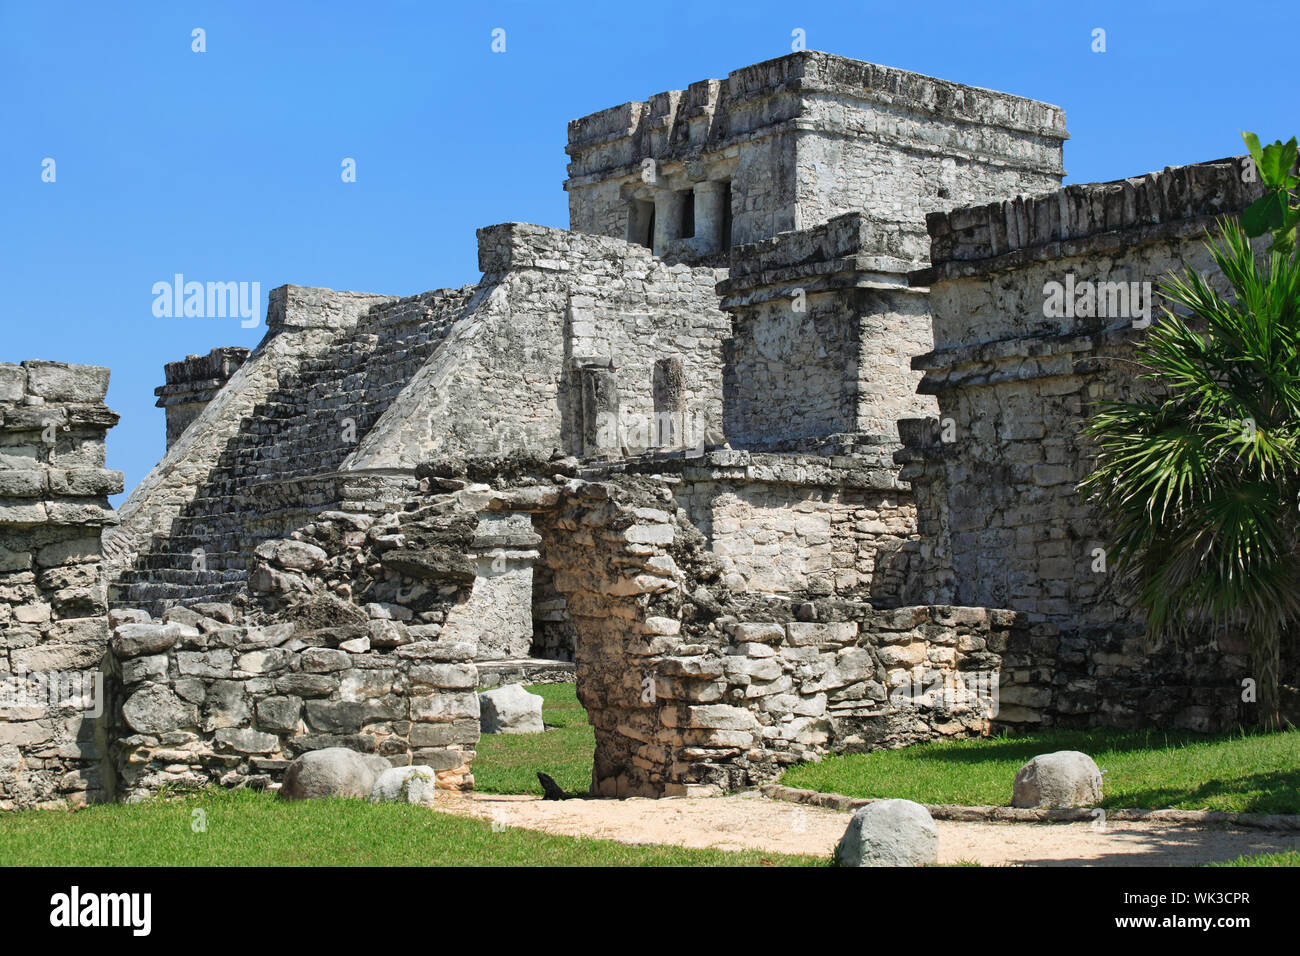 Photo Of The Mayan Ruins In Tulum Mexico Stock Photo Alamy